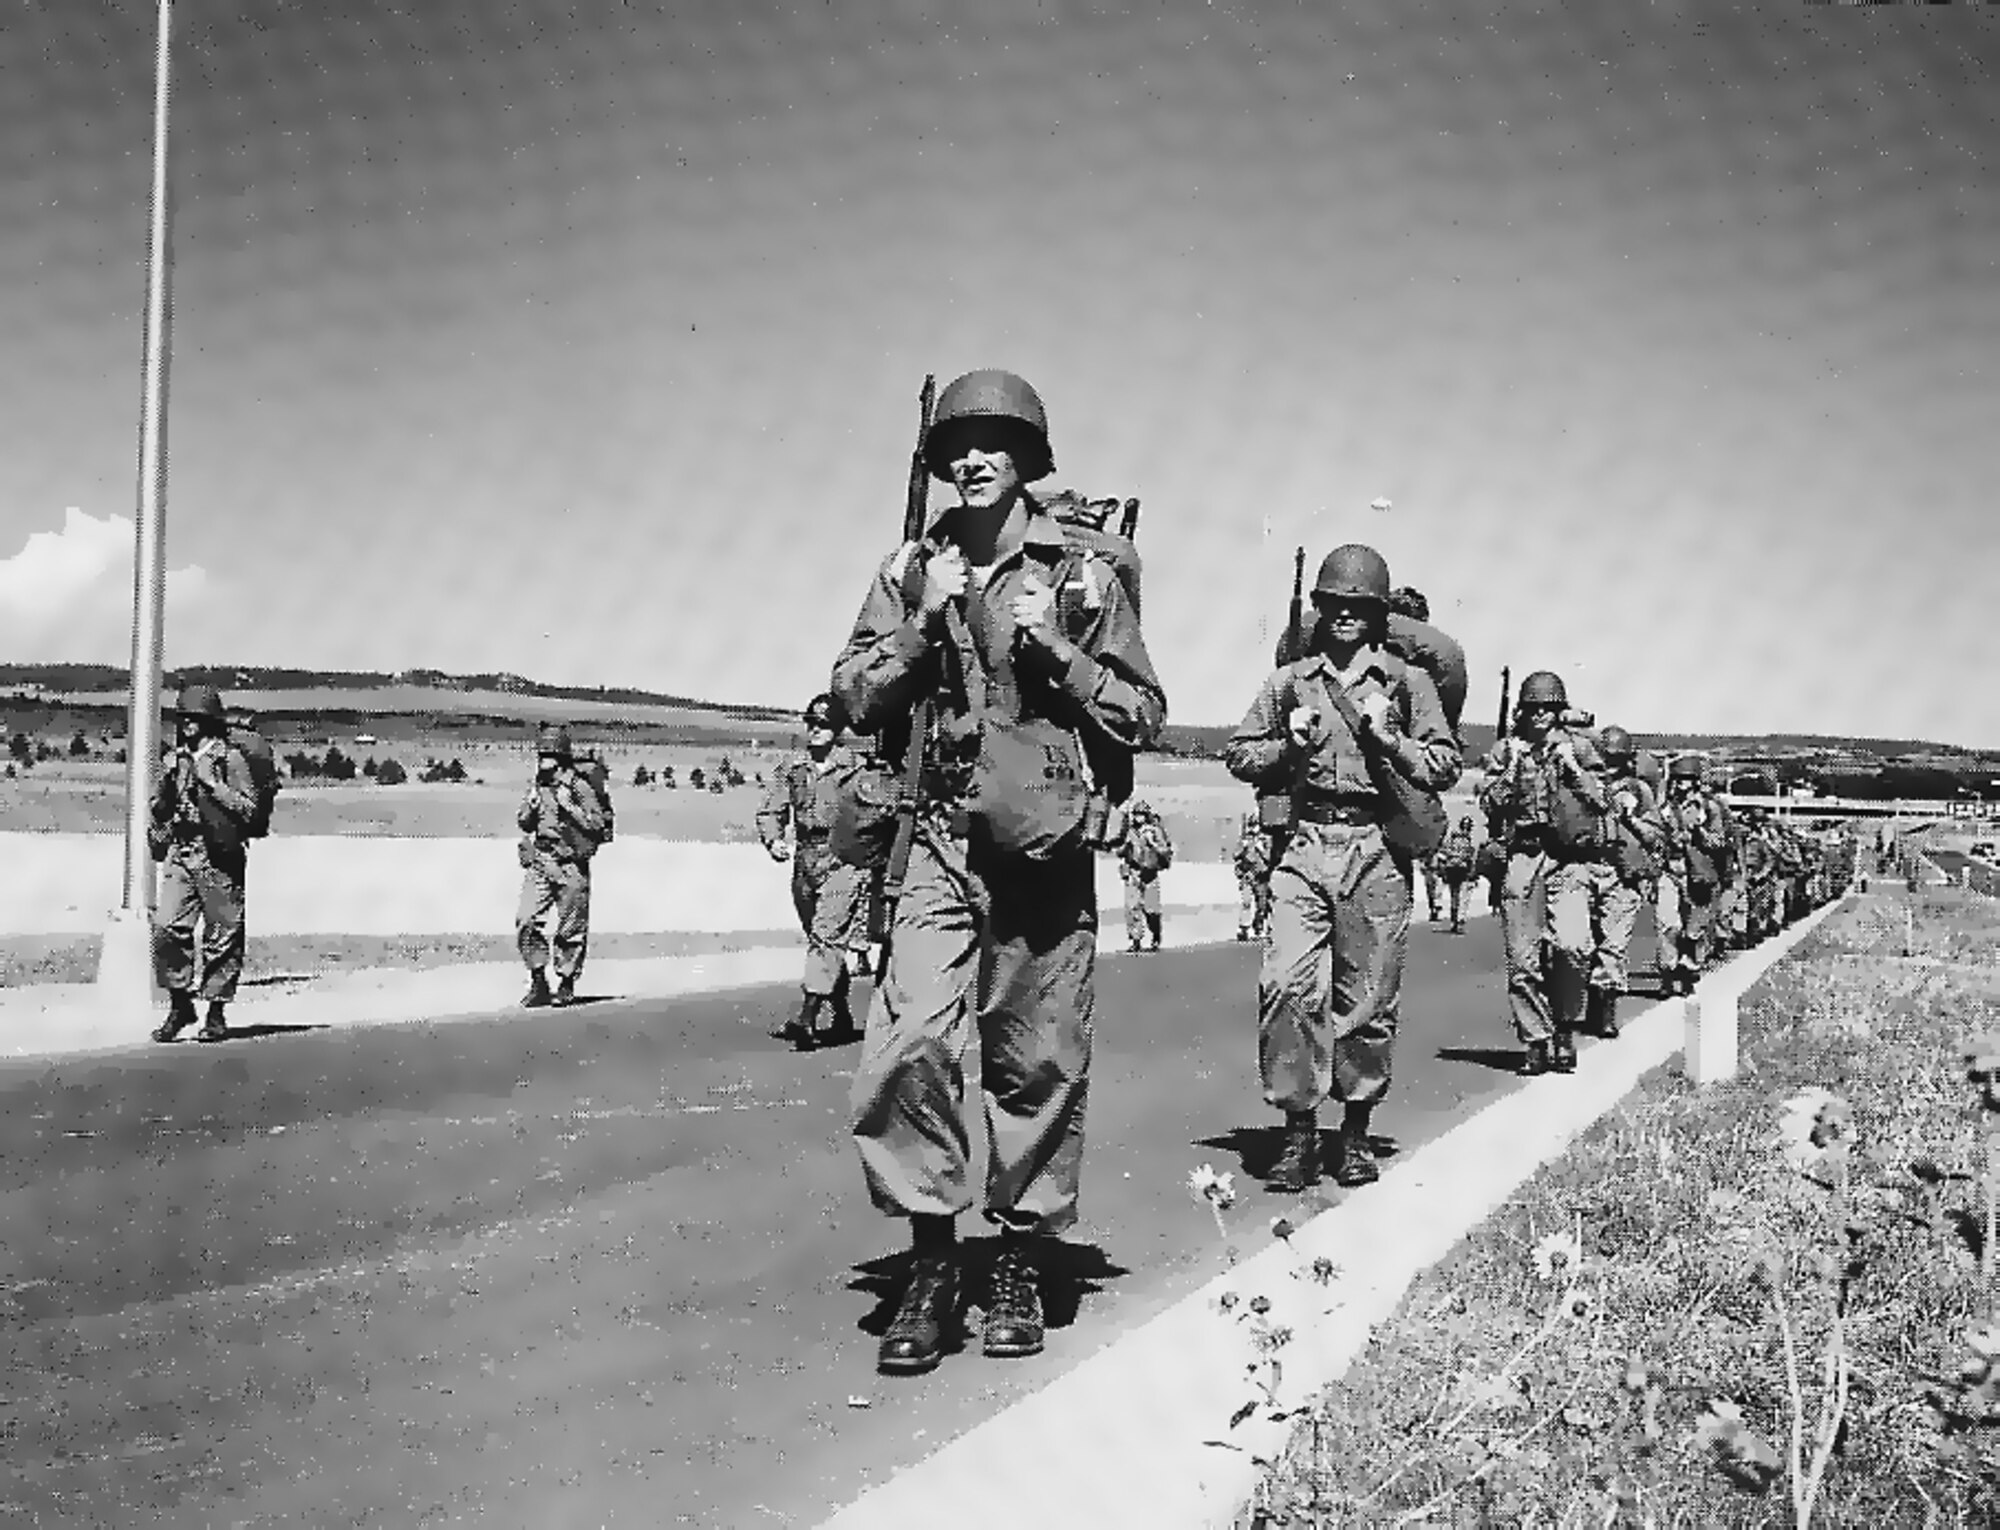 LOWRY AIR FORCE BASE, Colo. -- Cadets from the first Air Force Academy class march during a training exercise at the school's temporary location here during the summer of 1955.  (U.S. Air Force photo)
